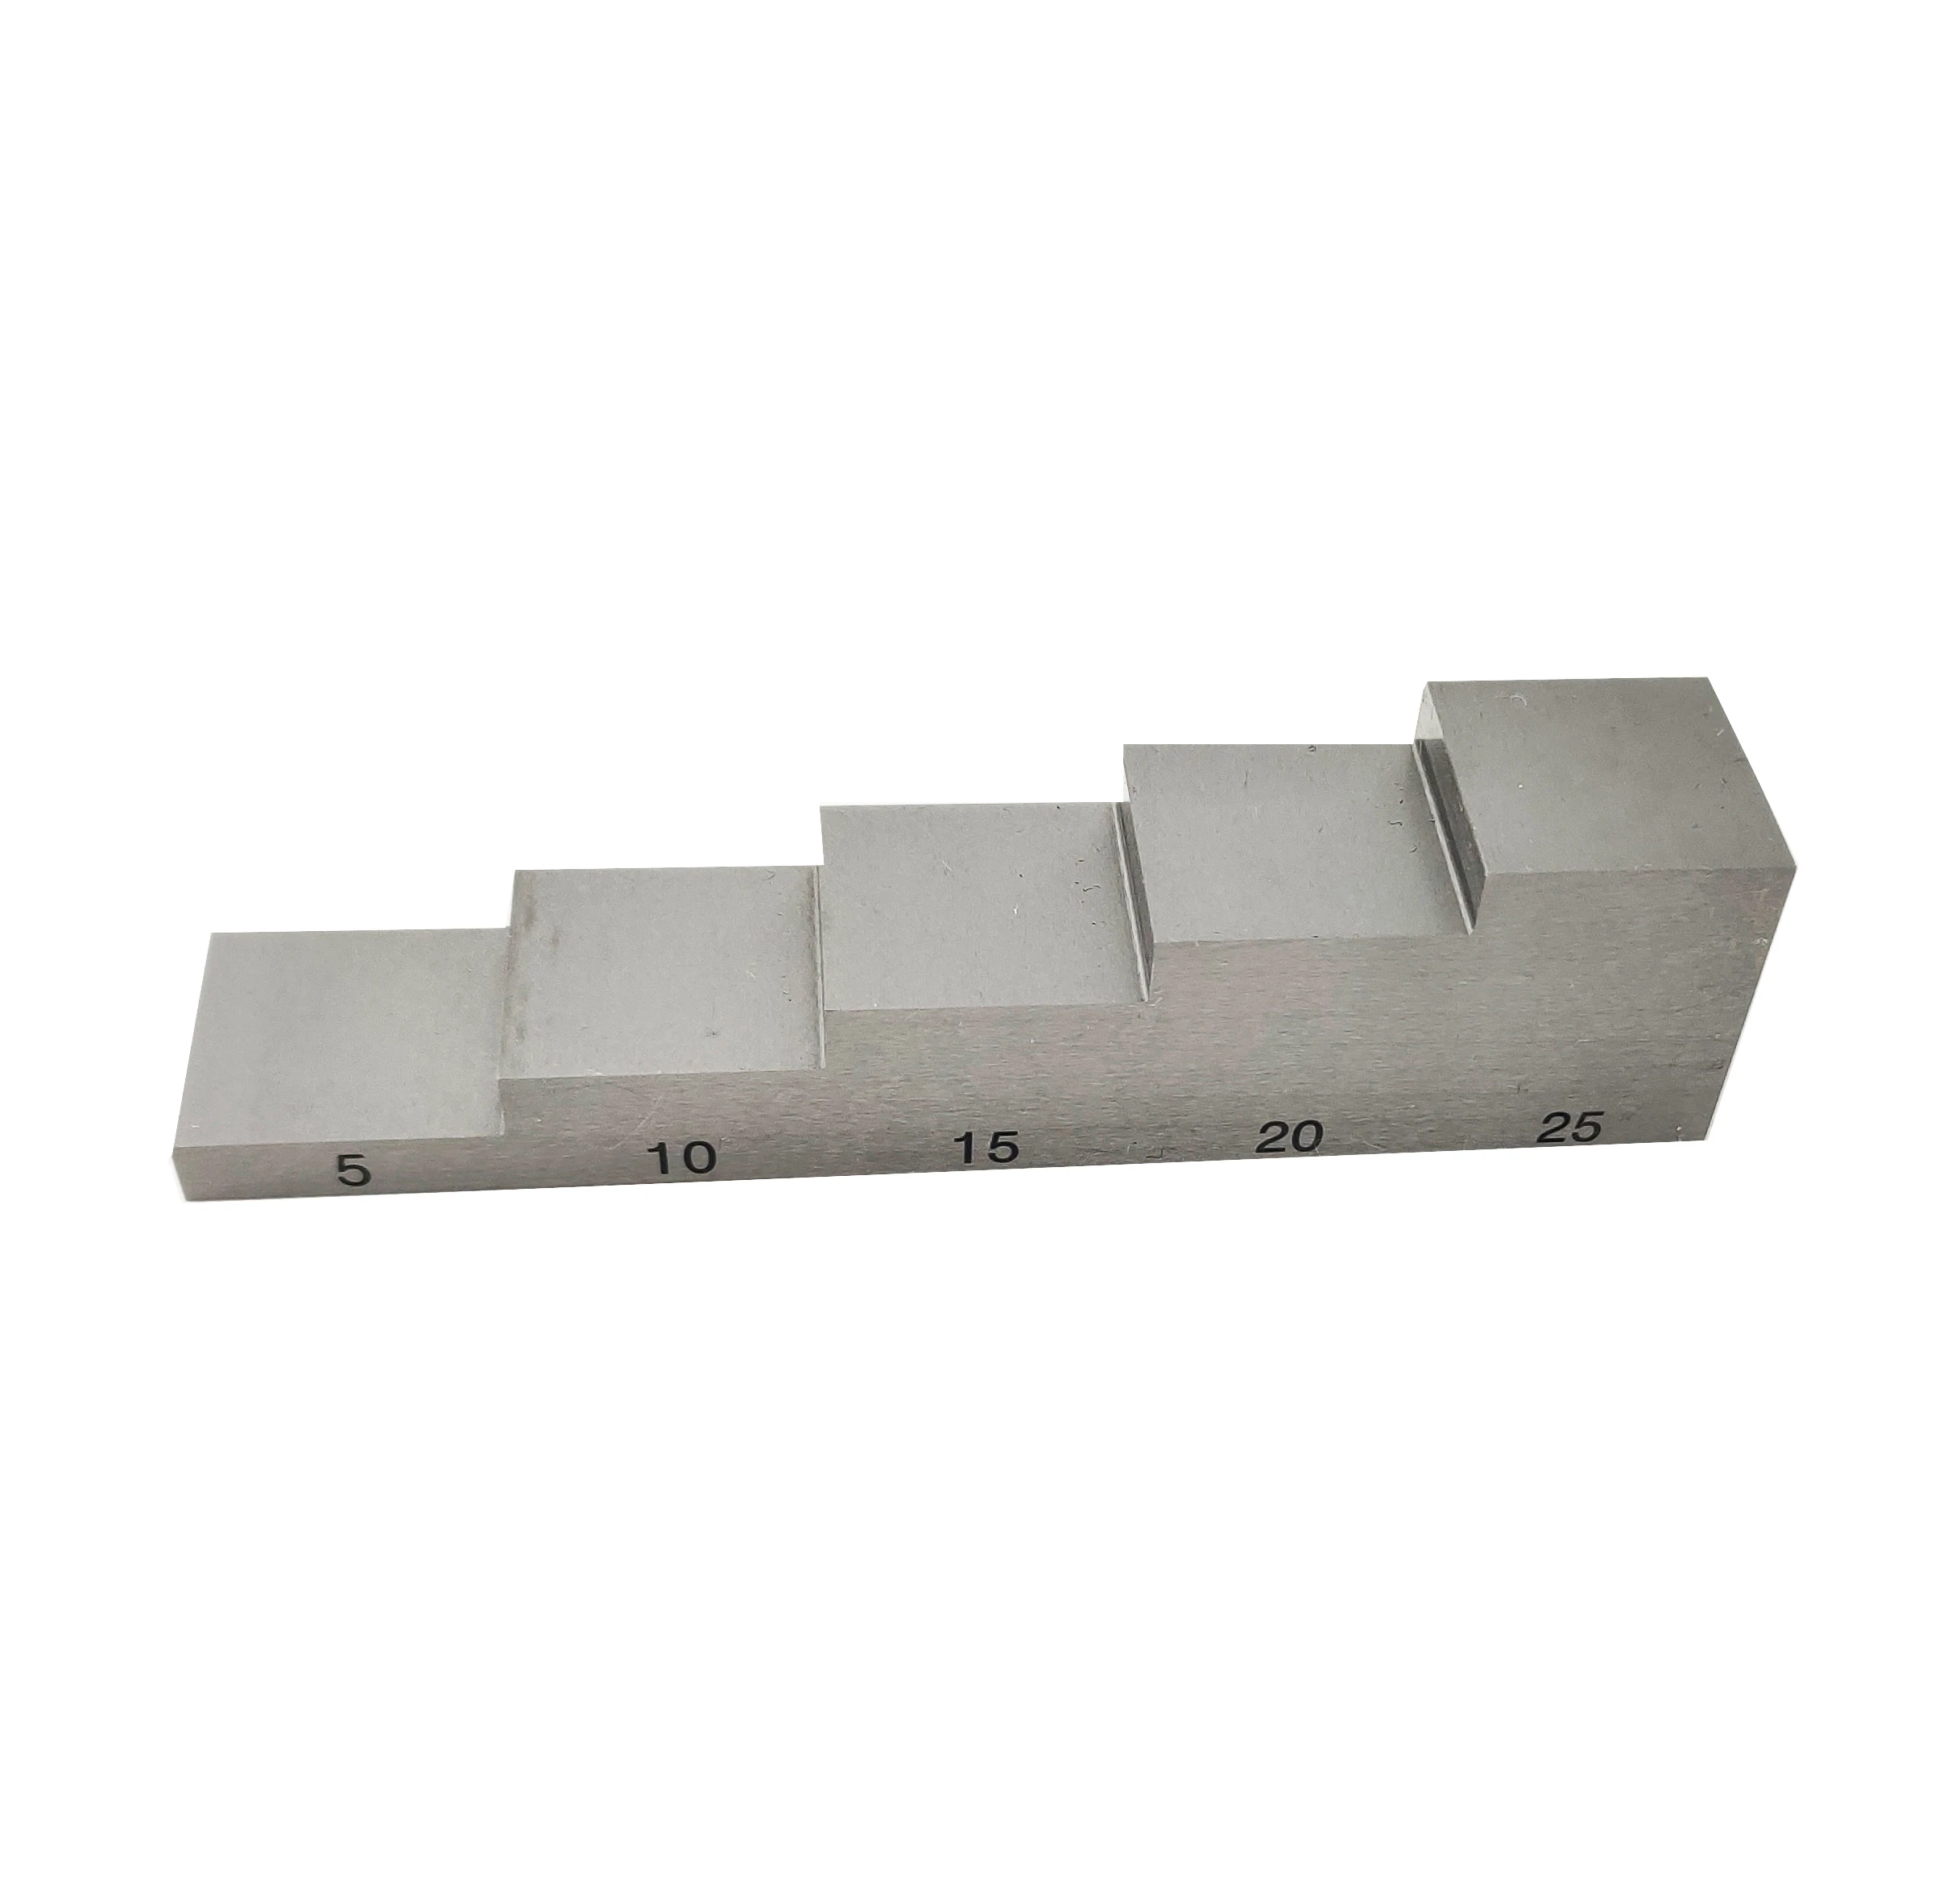 UT Aluminum Test Block& Calibration Thickness Block 4 Step 0.250.50.751 Inch with ABS Carrying case 